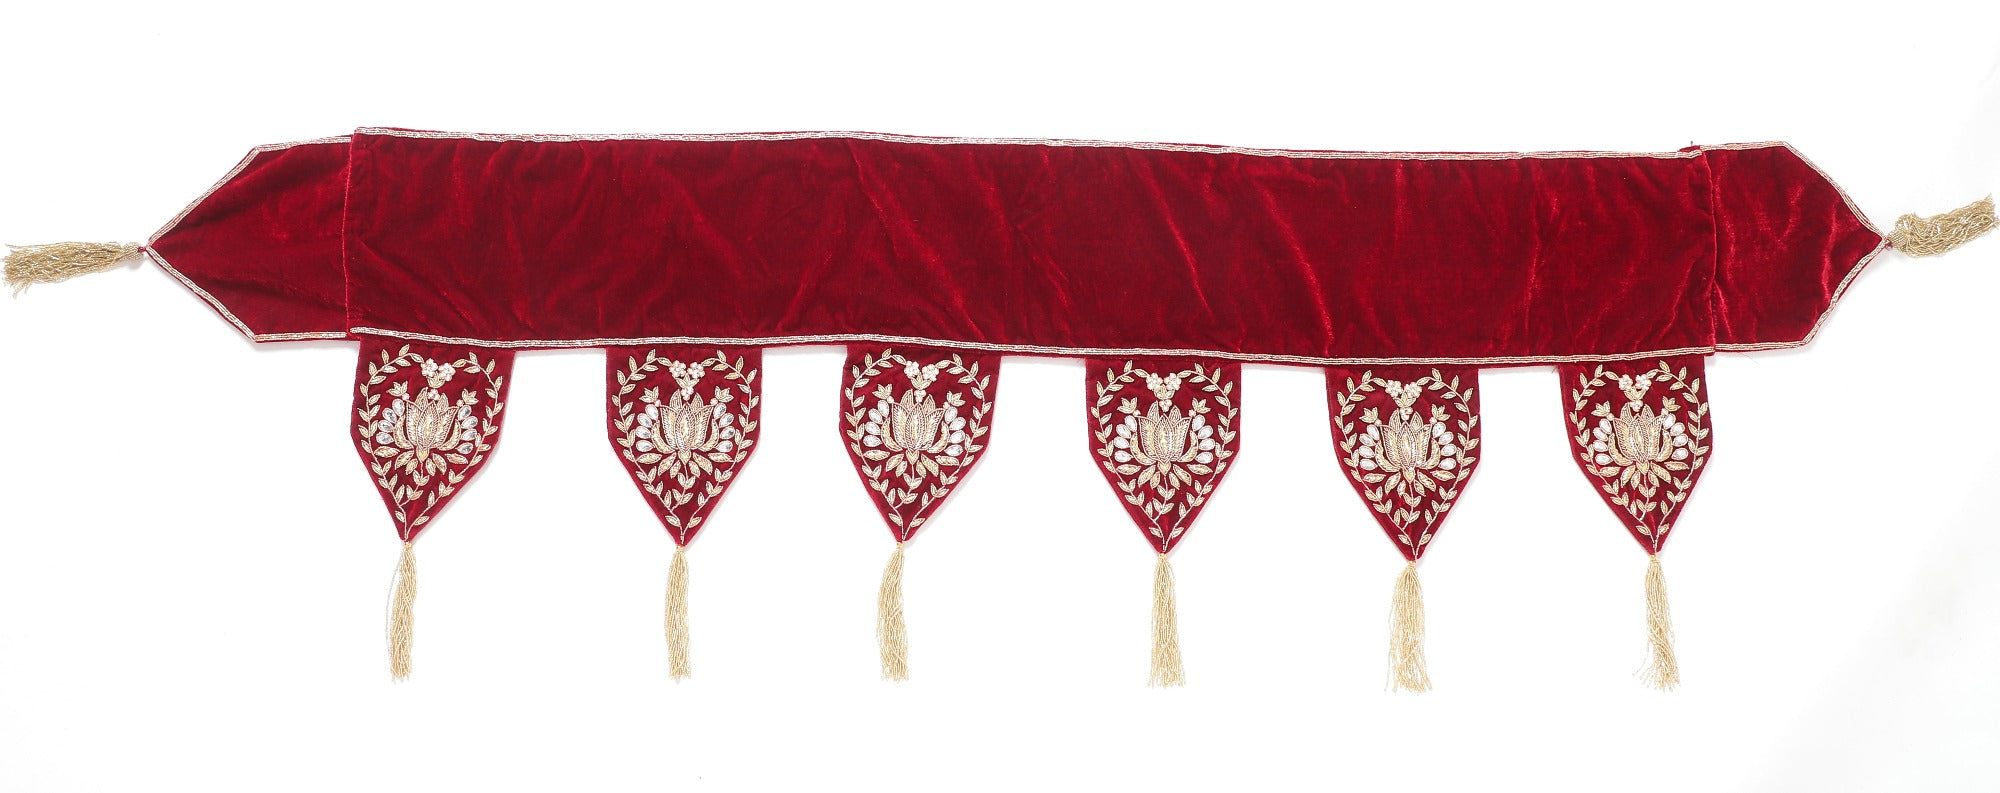 Lotus Red velvet Christmas Mantle Scarf Available in 2 sizes 60" & 72"